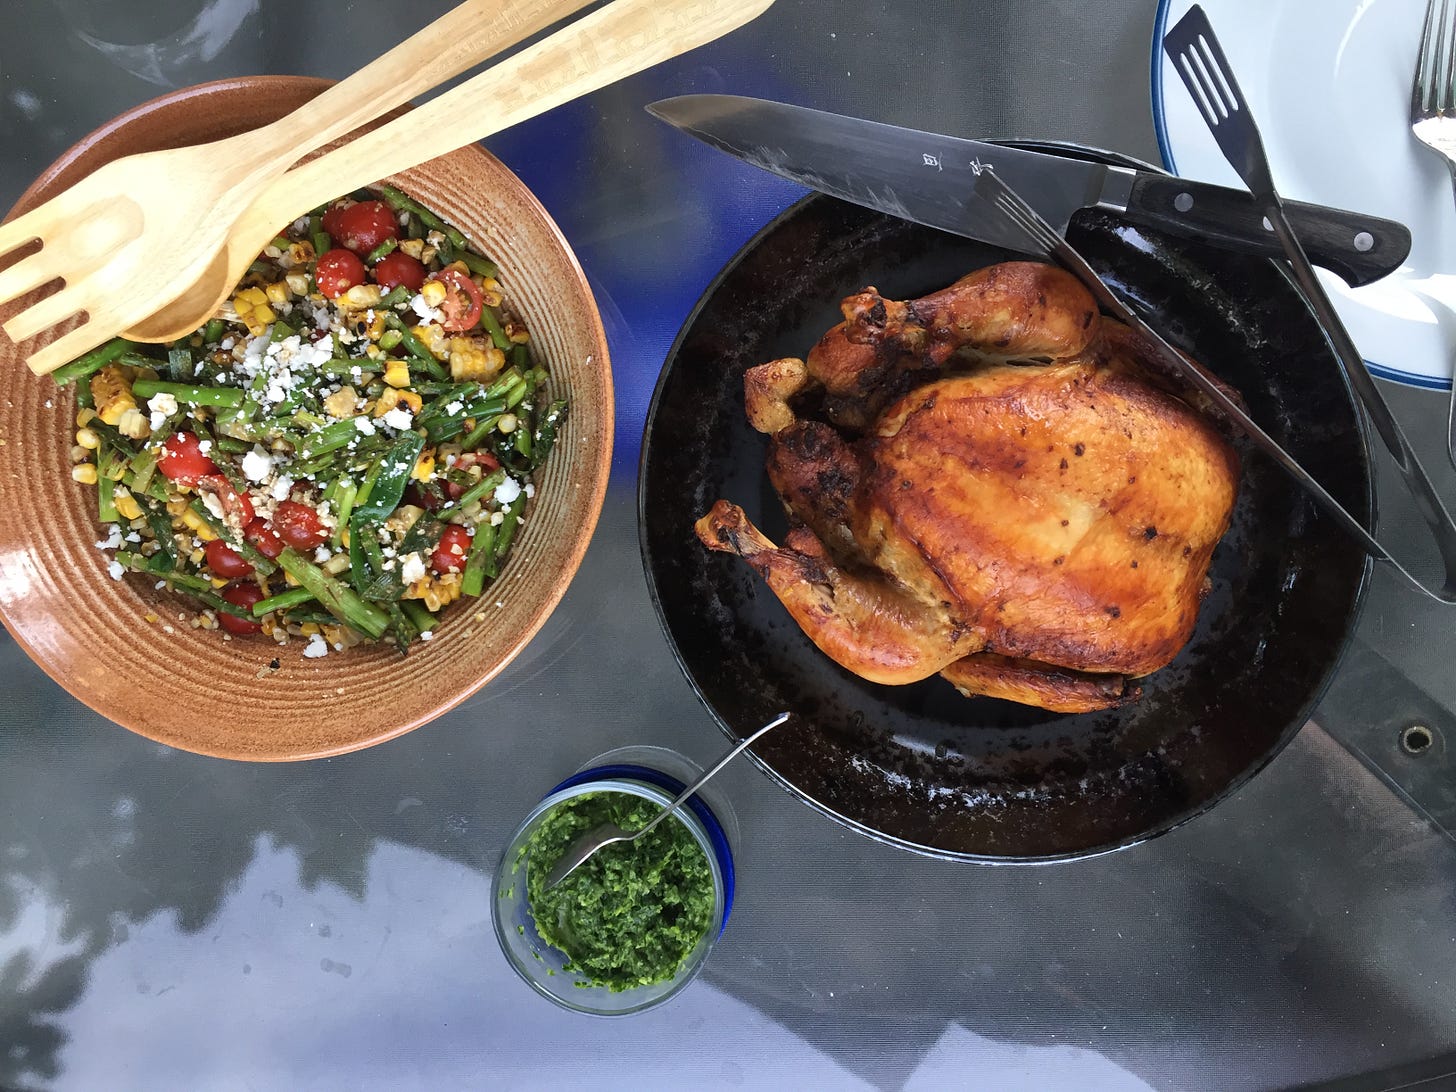 From above, an outdoor table with a bowl of corn, asparagus, and tomato salad sprinkled with feta. A wooden fork and spoon sit at the edge of the bowl. To its right, a black dish with a darkly browned roast chicken. A large knife and a pair of tongs rest on the edge of the dish. Between the two dishes is a small glass bowl of chimichurri.